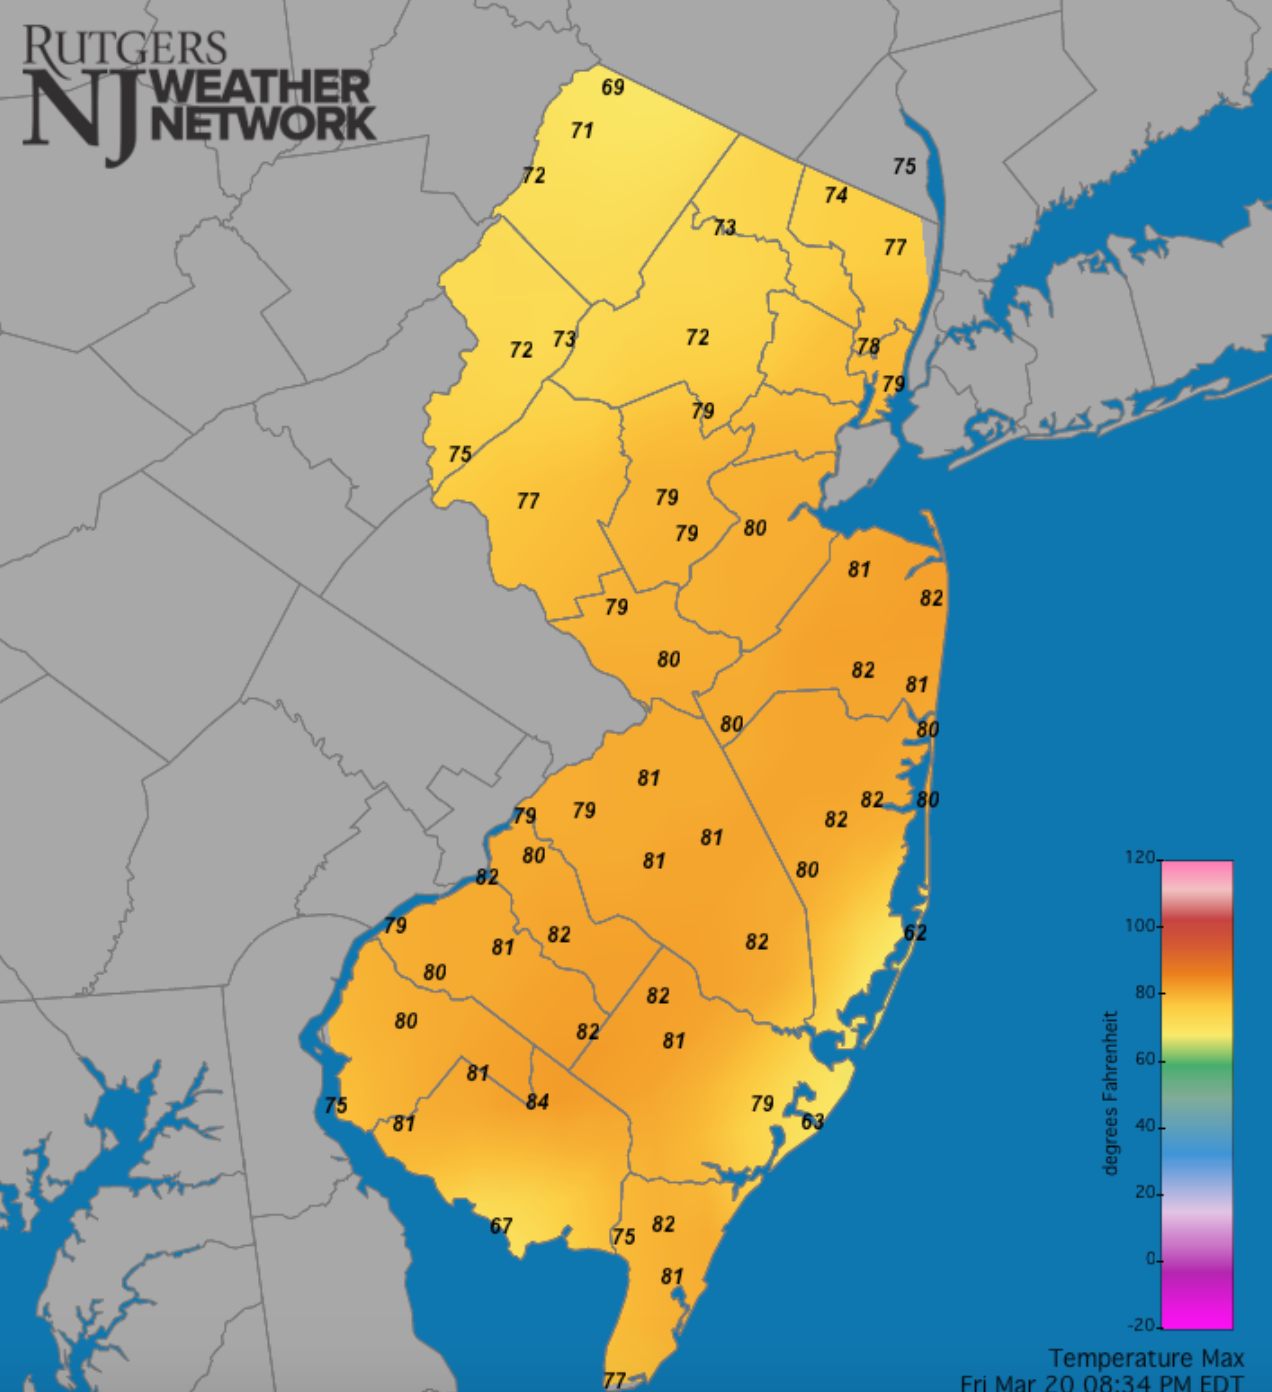  Maximum temperatures at NJWxNet stations on March 20th.